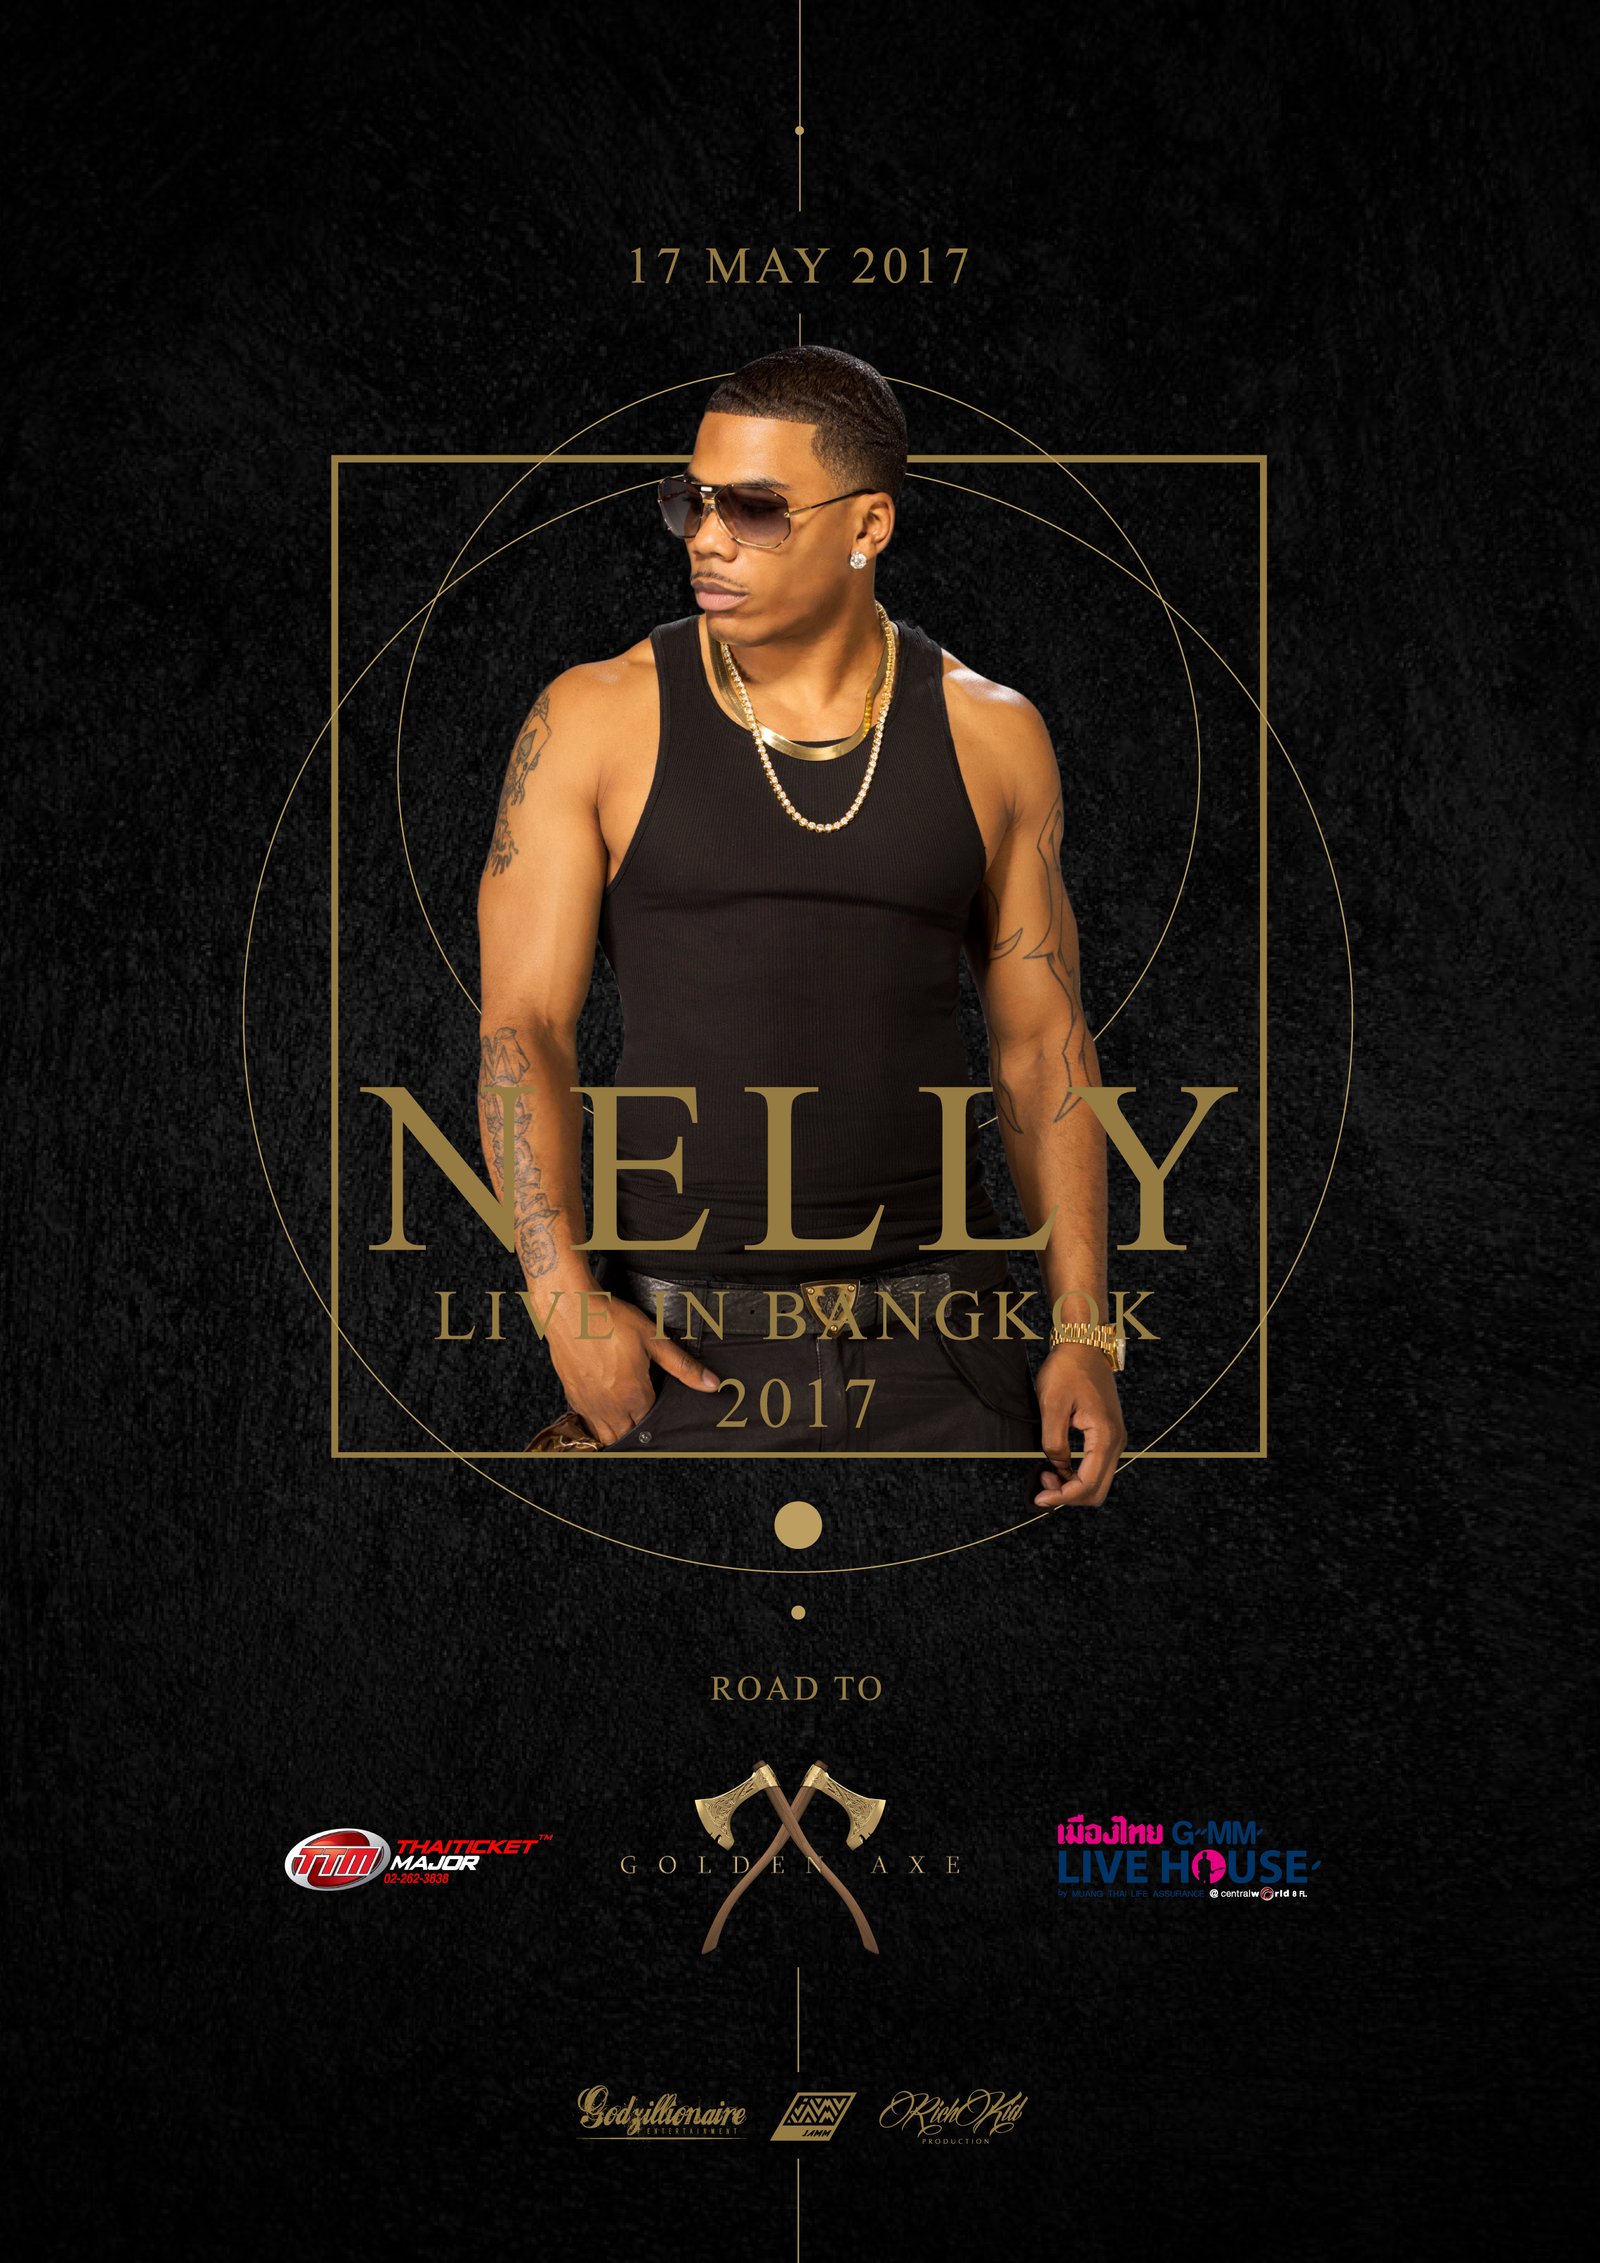 Road-To-Golden-axe-Nelly-04-outline